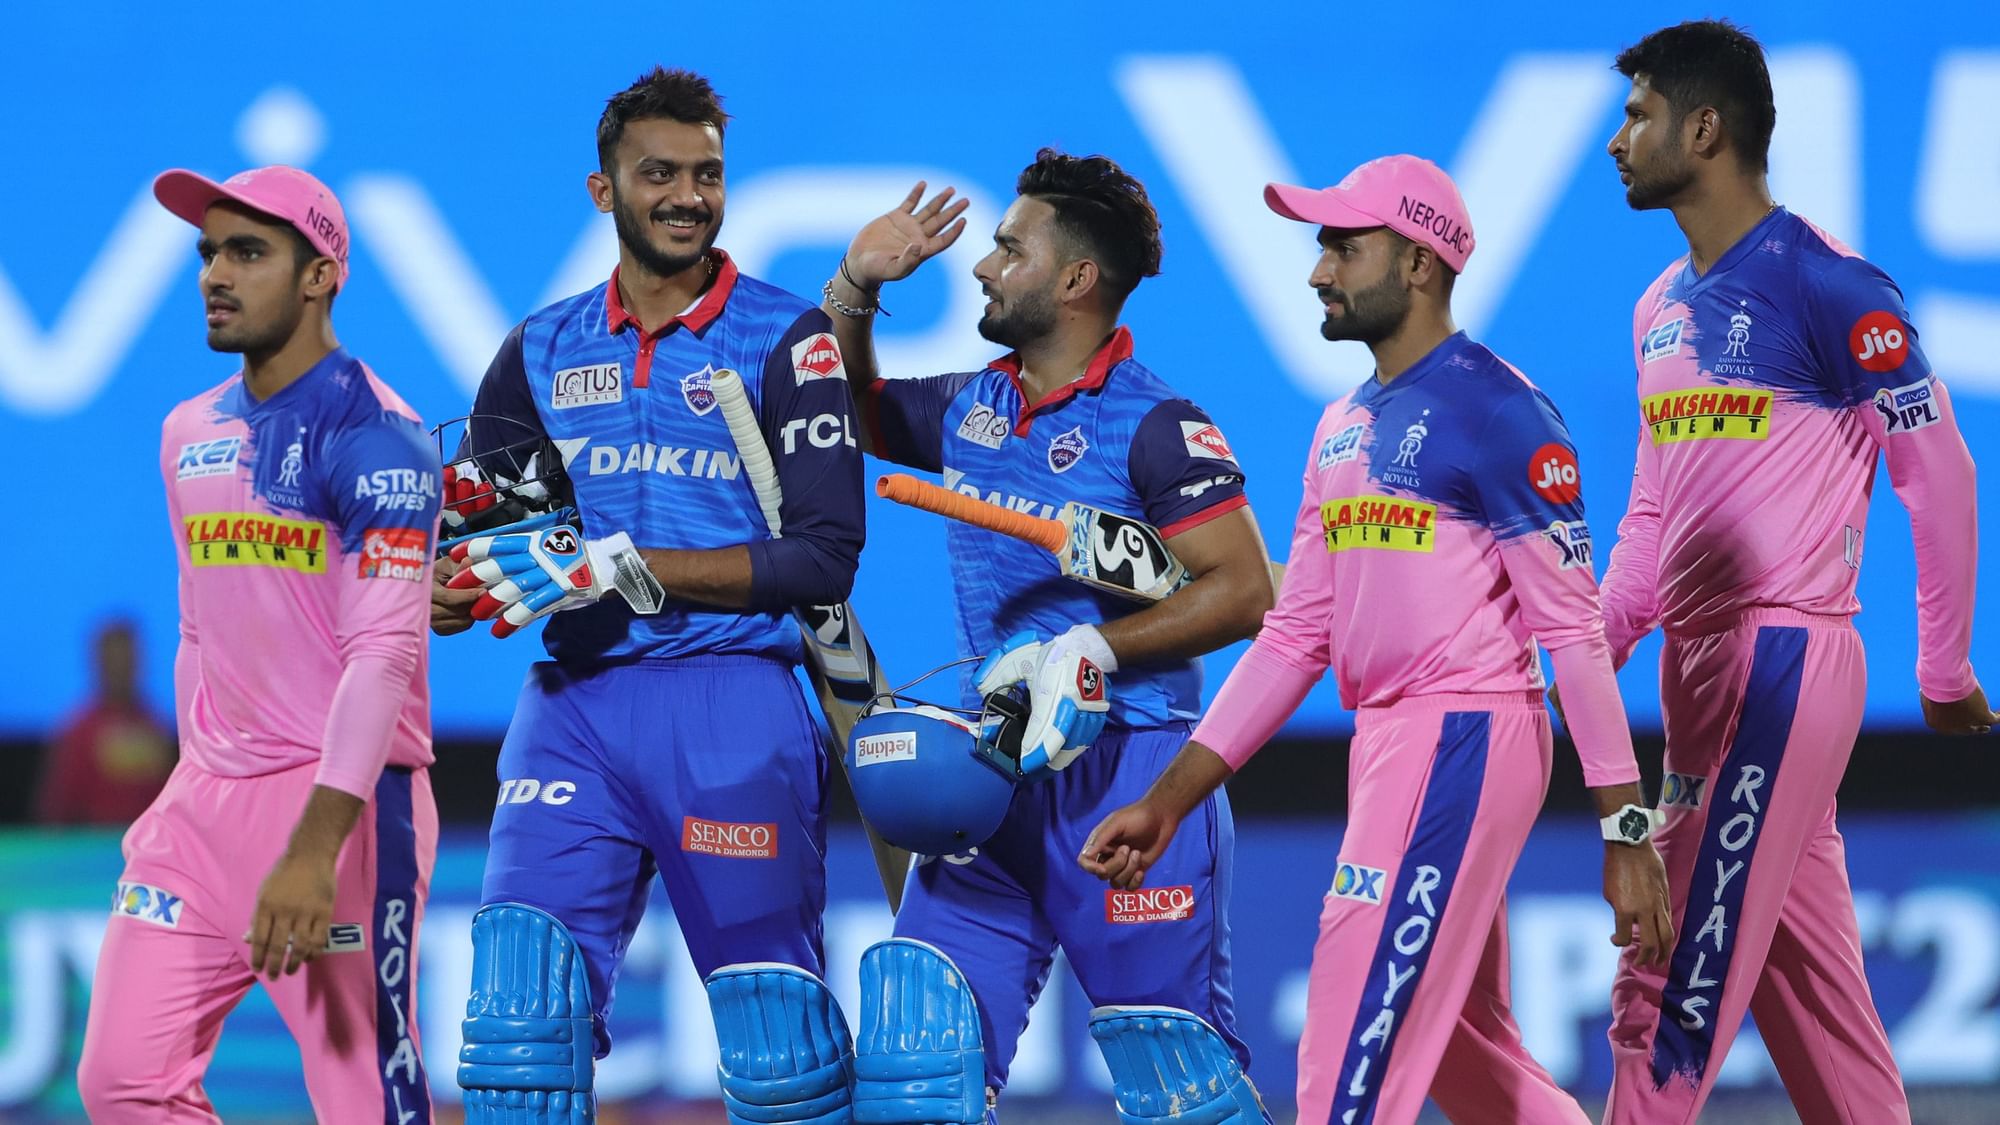 IPL teams Rajasthan Royals and Delhi Capitals are okay with playing an IPL without foreign players this year.